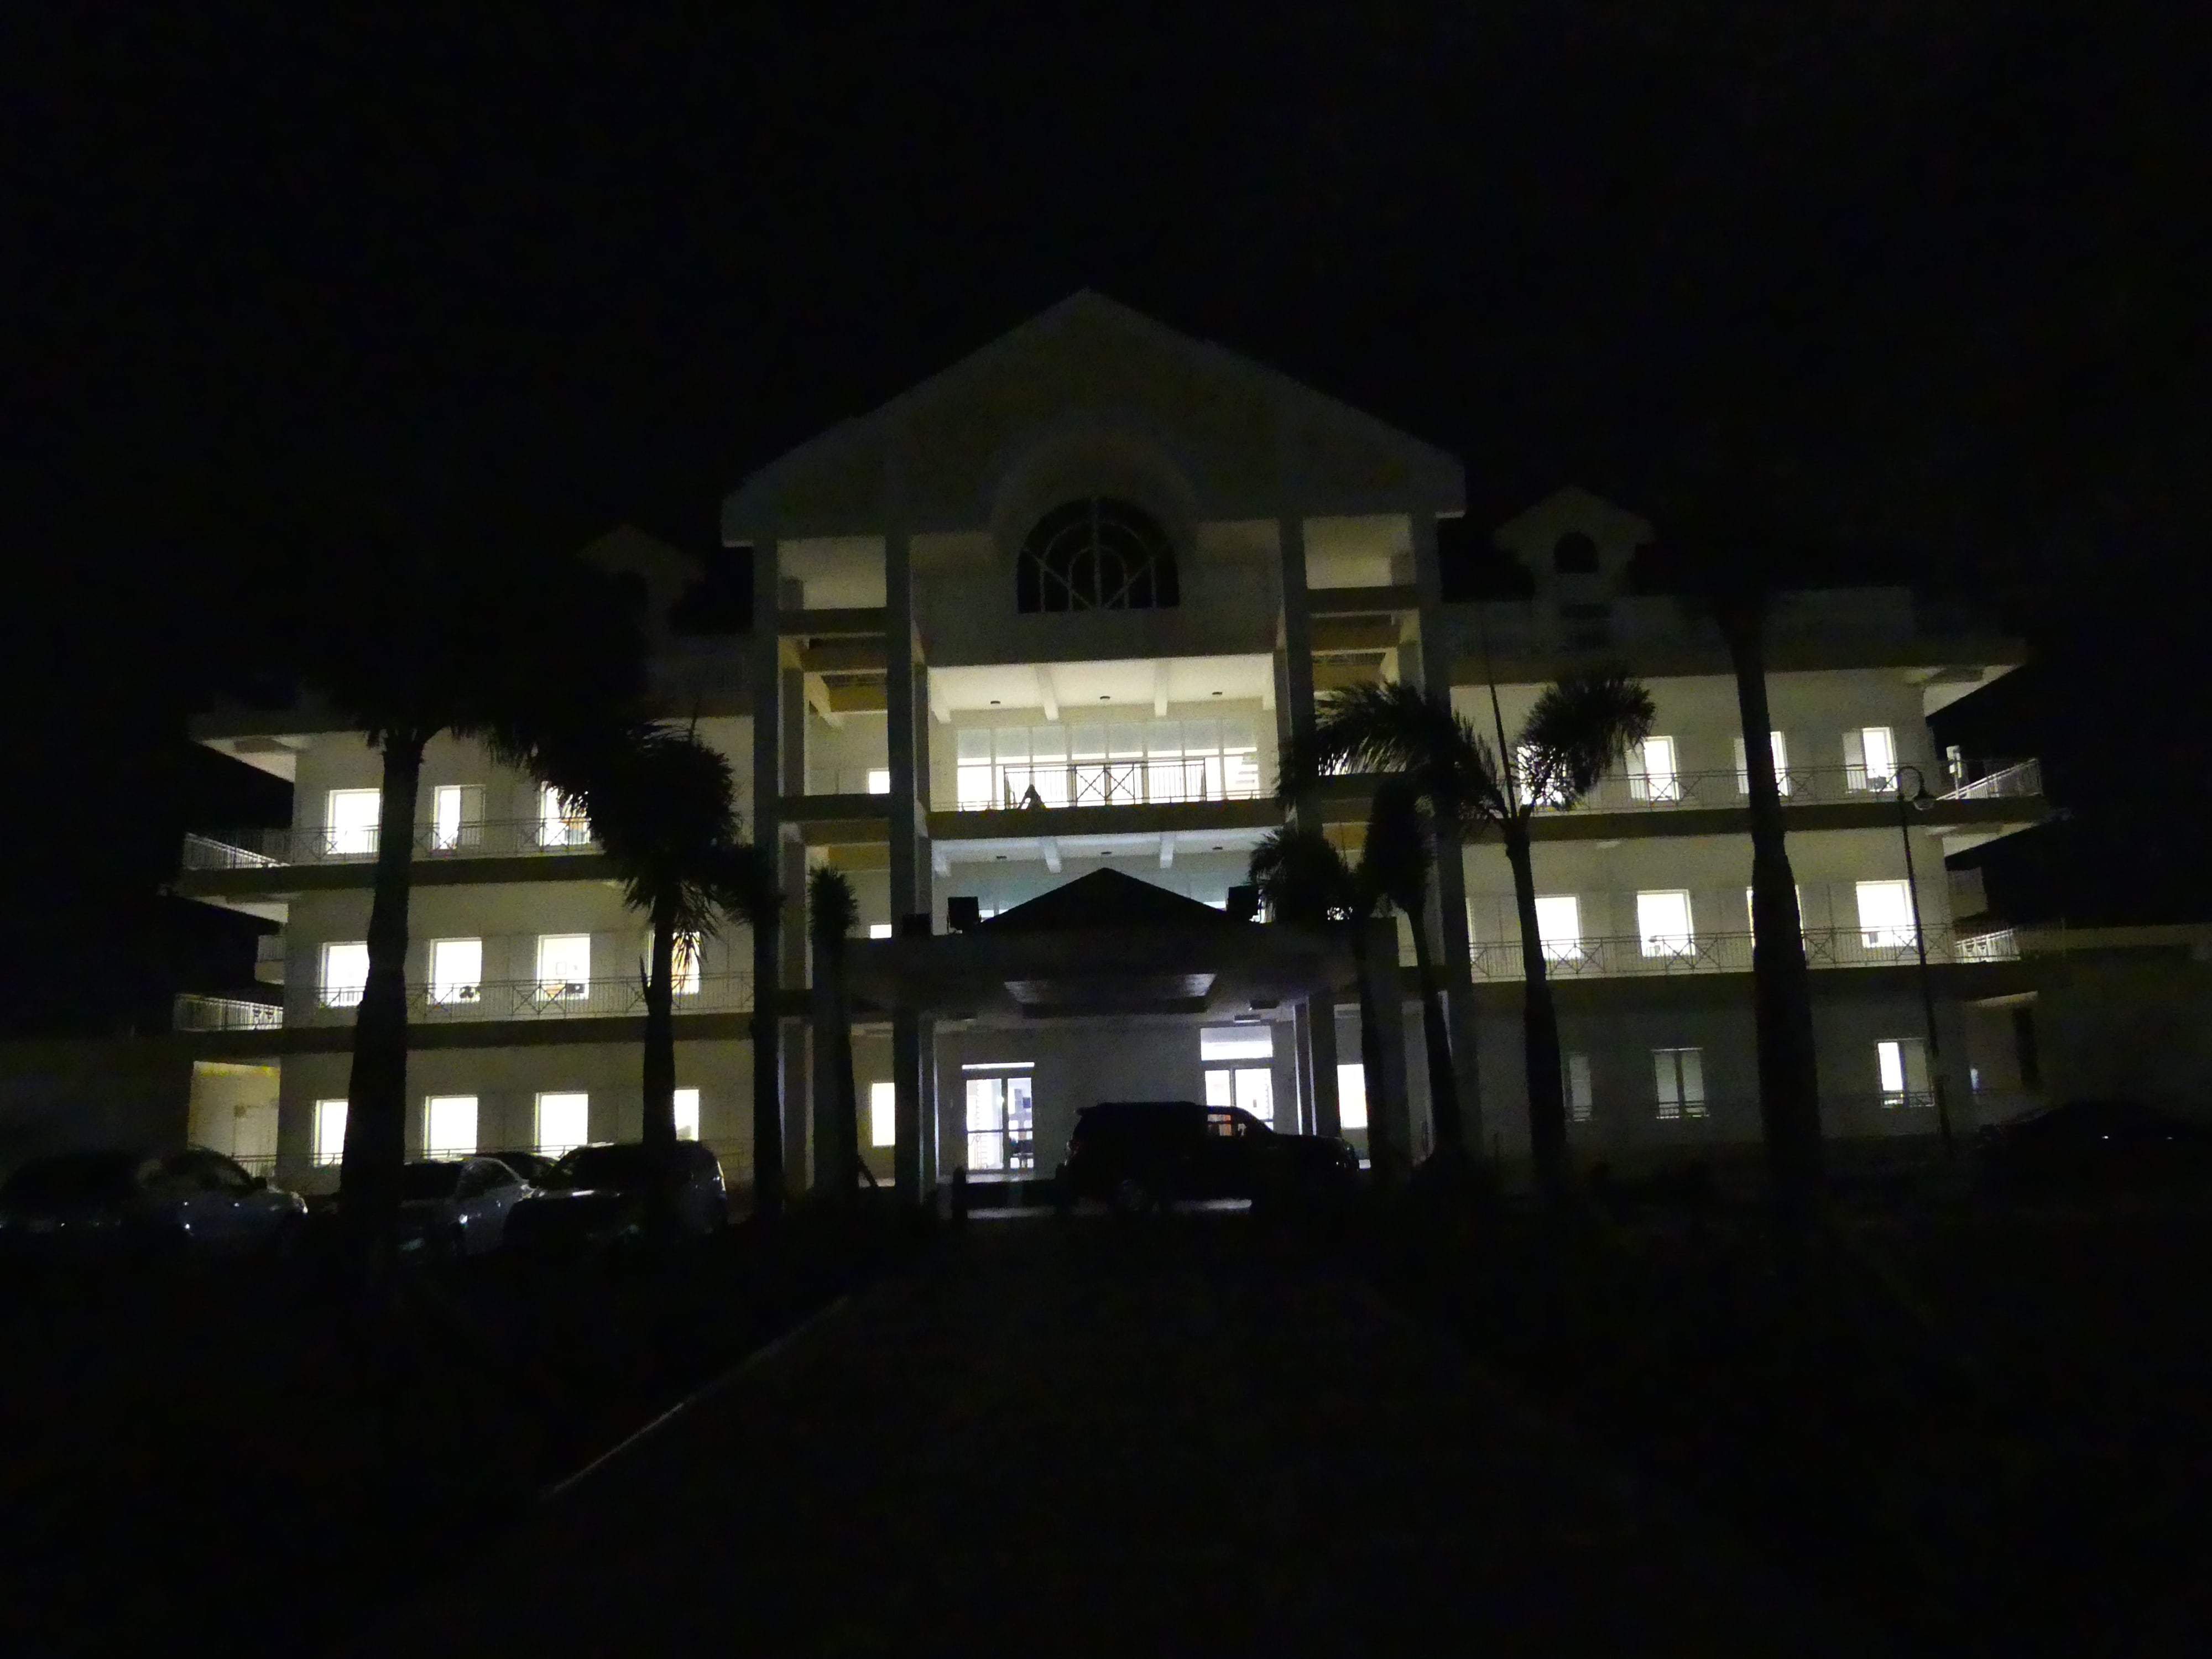 Lights on at government building 20180131 - HH-min